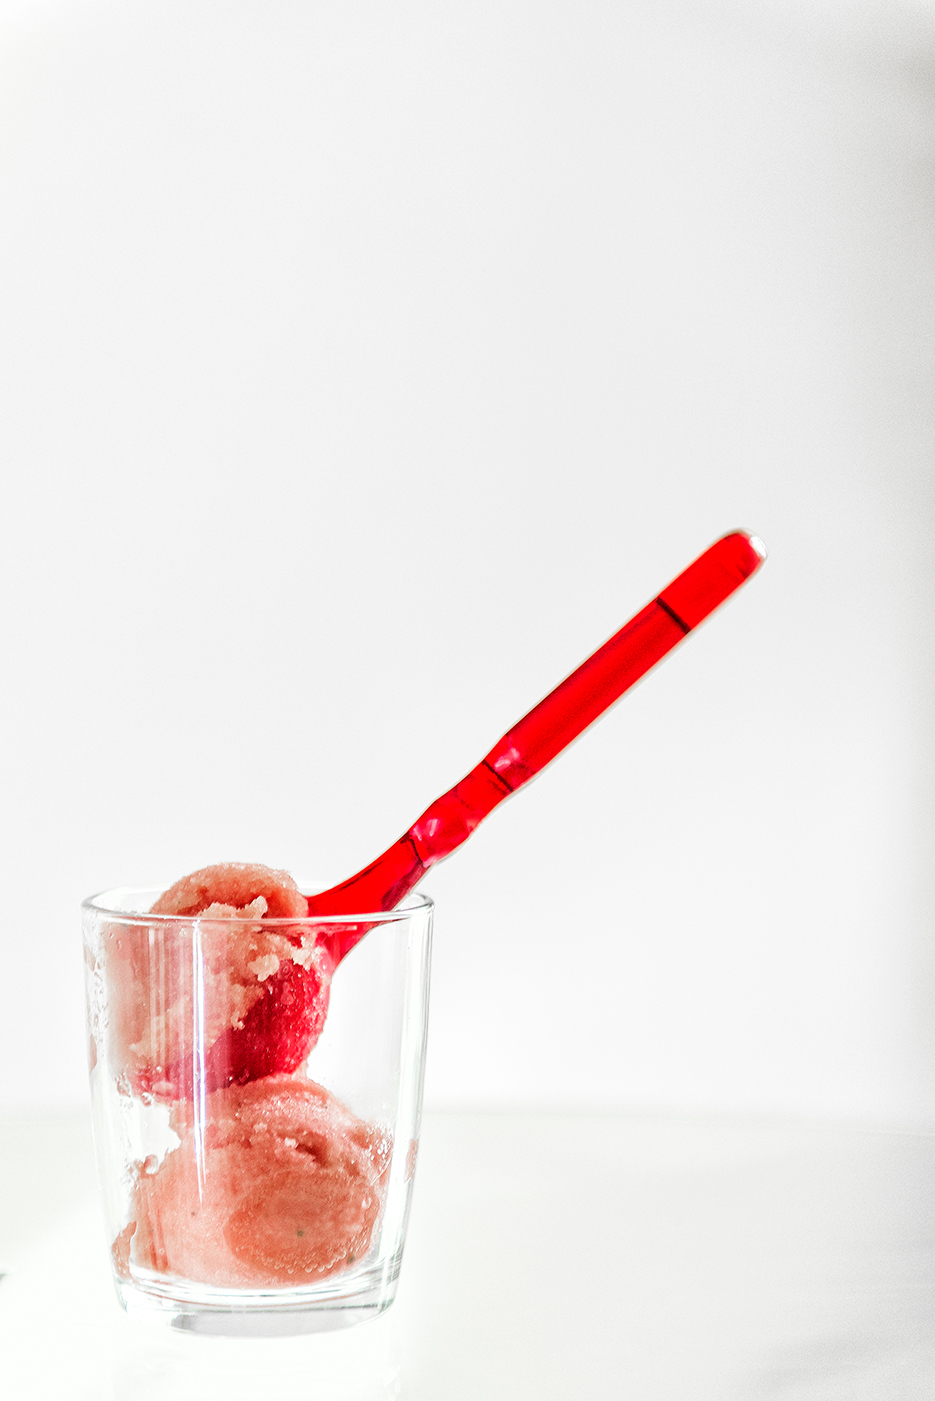 Cold drink : Watermelon and lemon sorbet and juice / beverage. Food photography. Photography by professional Indian lifestyle photographer Naina Redhu of Naina.co